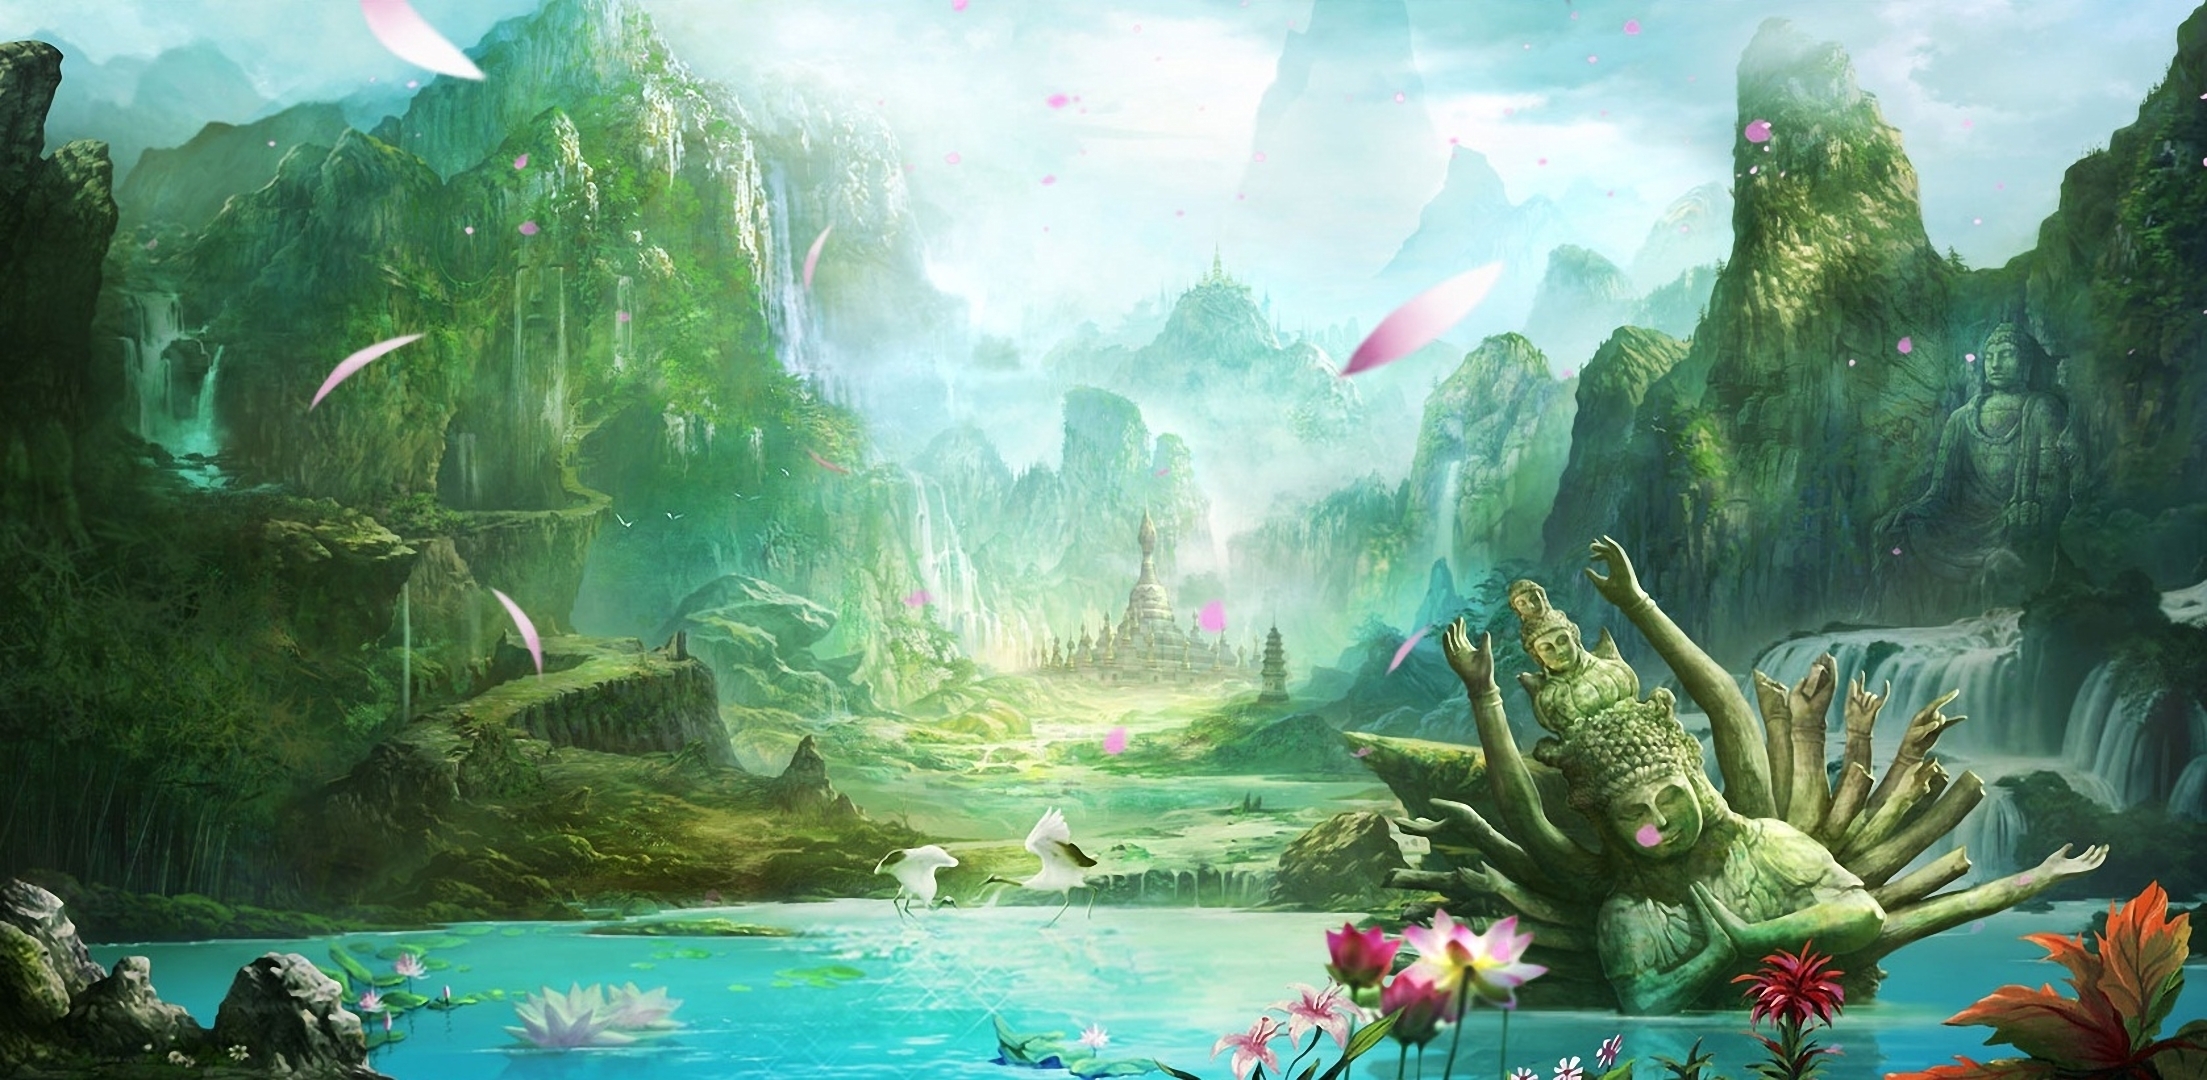 anime art wallpaper,nature,natural landscape,natural environment,jungle,theatrical scenery